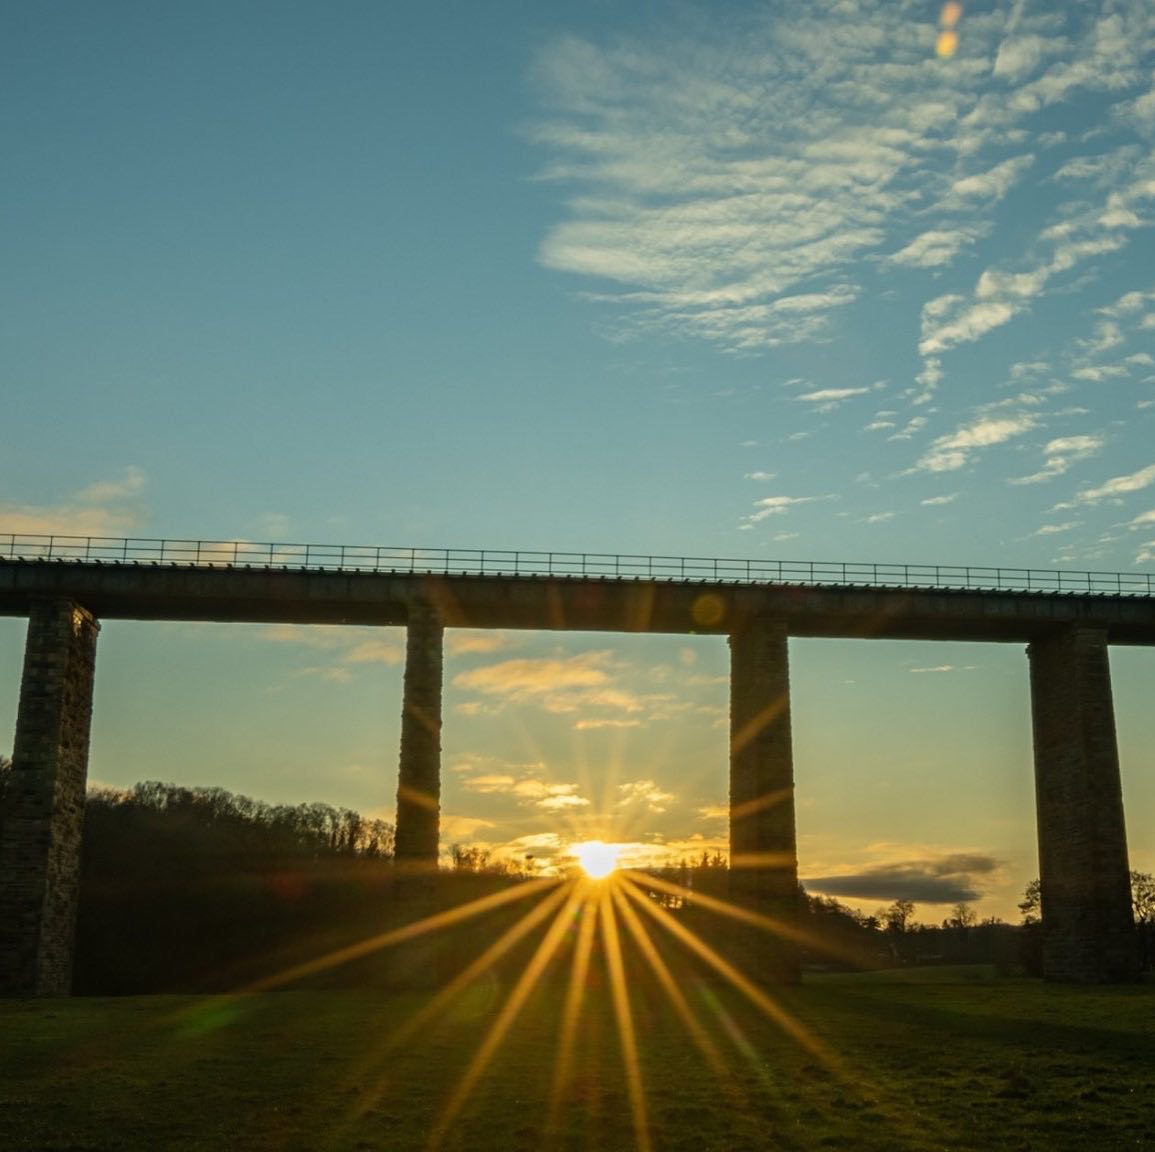 Throw back to the better weather, sun star at enterkine viaduct